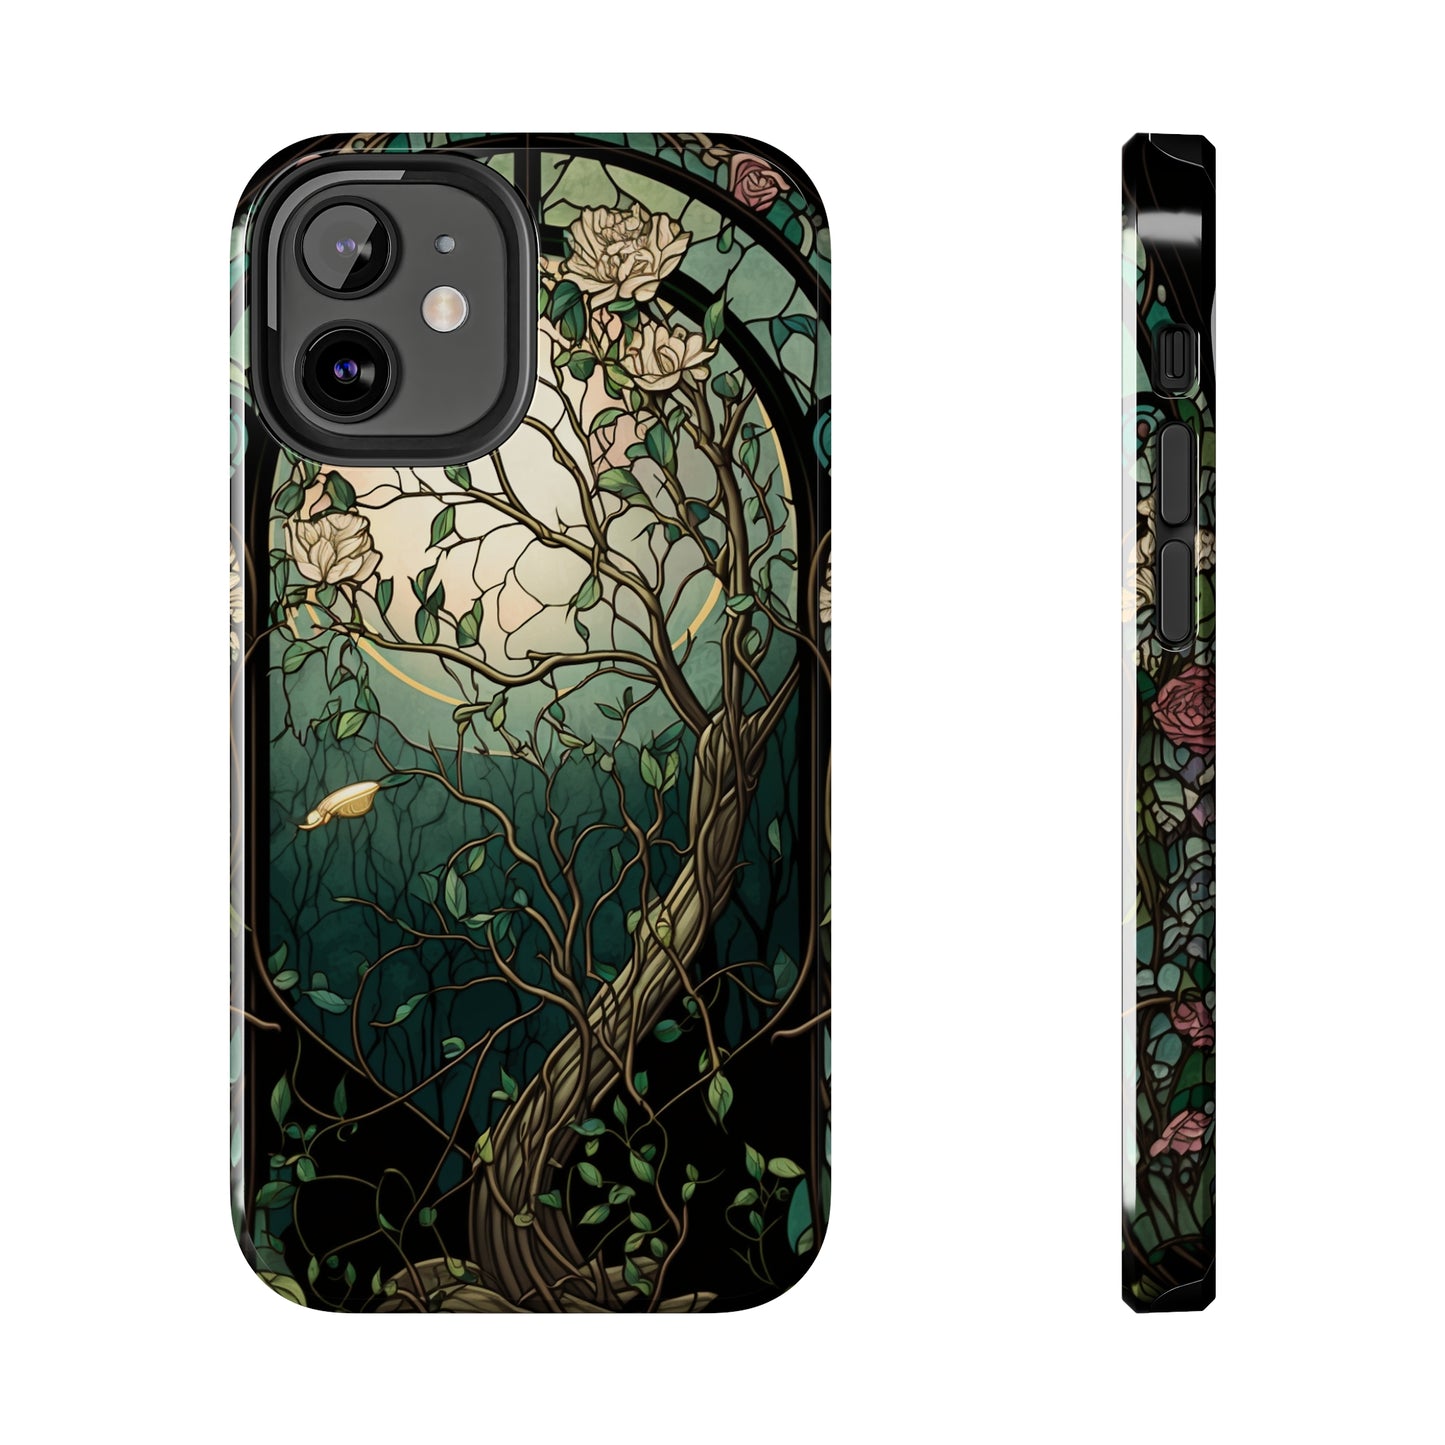 Retro Radiance: Stained Glass Floral Phone Case | Vintage Aesthetic for iPhone Models